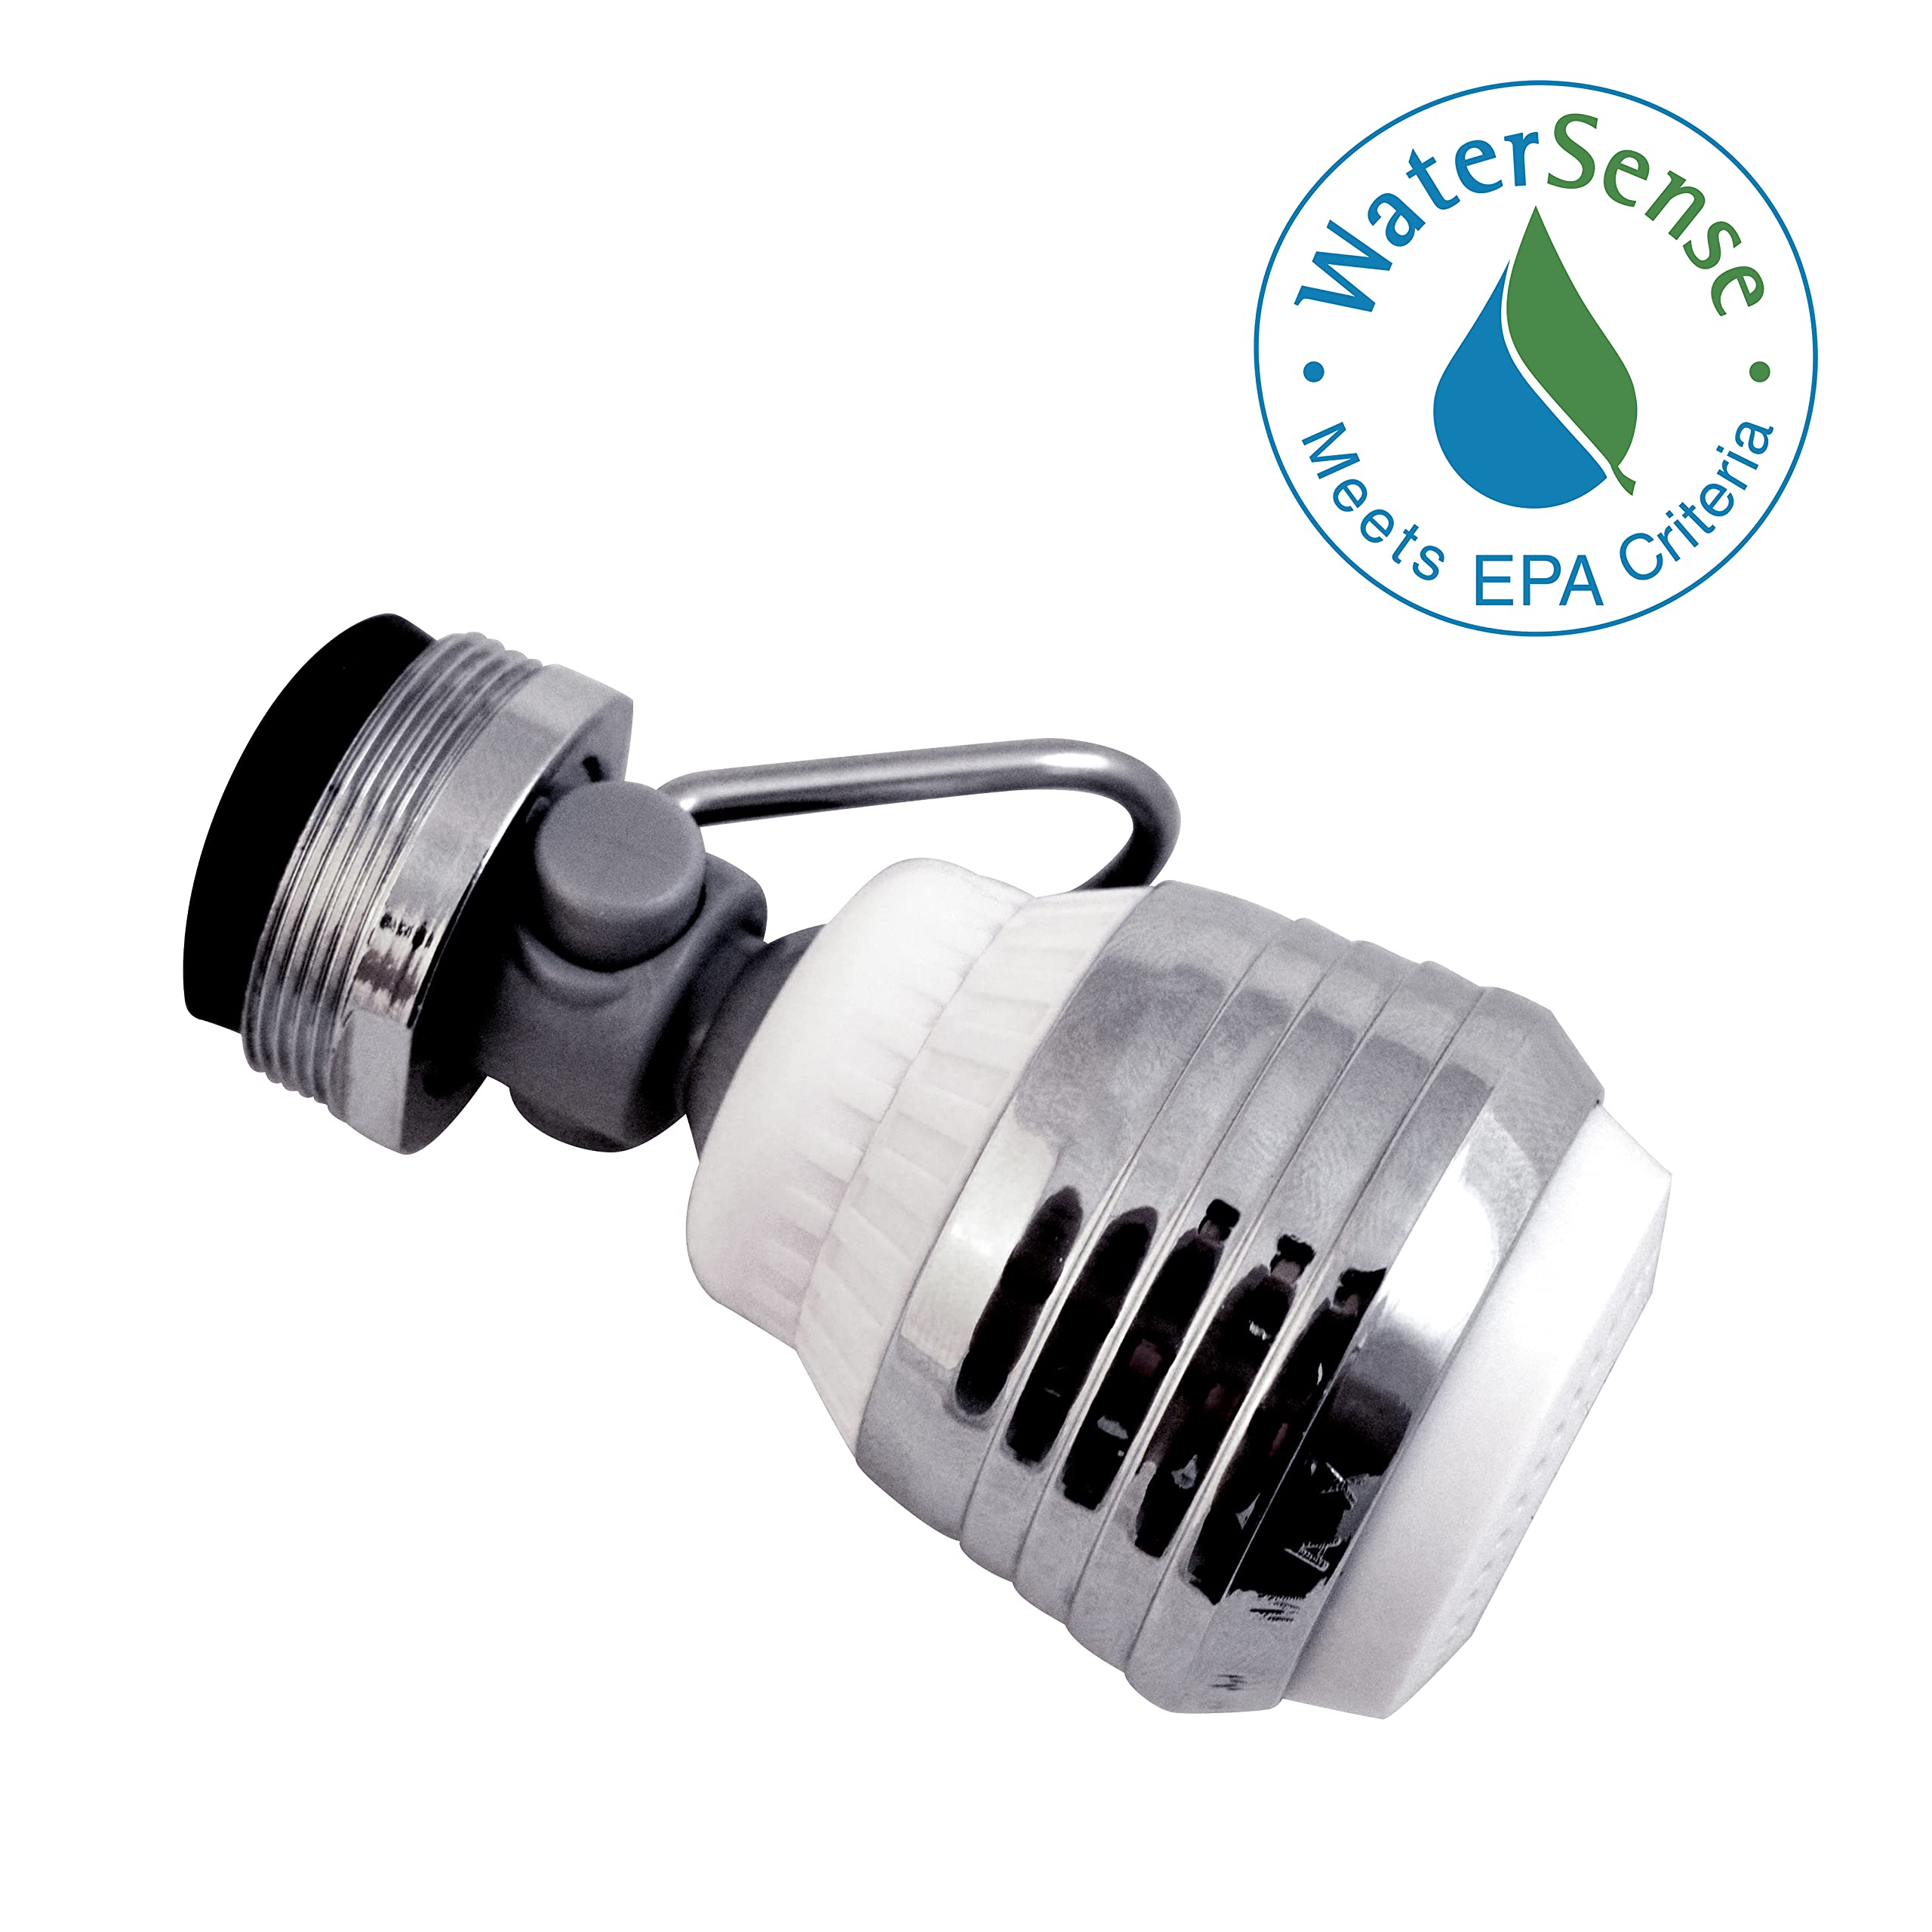 Niagara Conservation - N3115P-FC 1.5 GPM Kitchen Dual Spray Swivel with Pause Valve California Compliant Sink Faucet Aerator - Standard Chrome and White Sink Aerator with Low Flow Rate